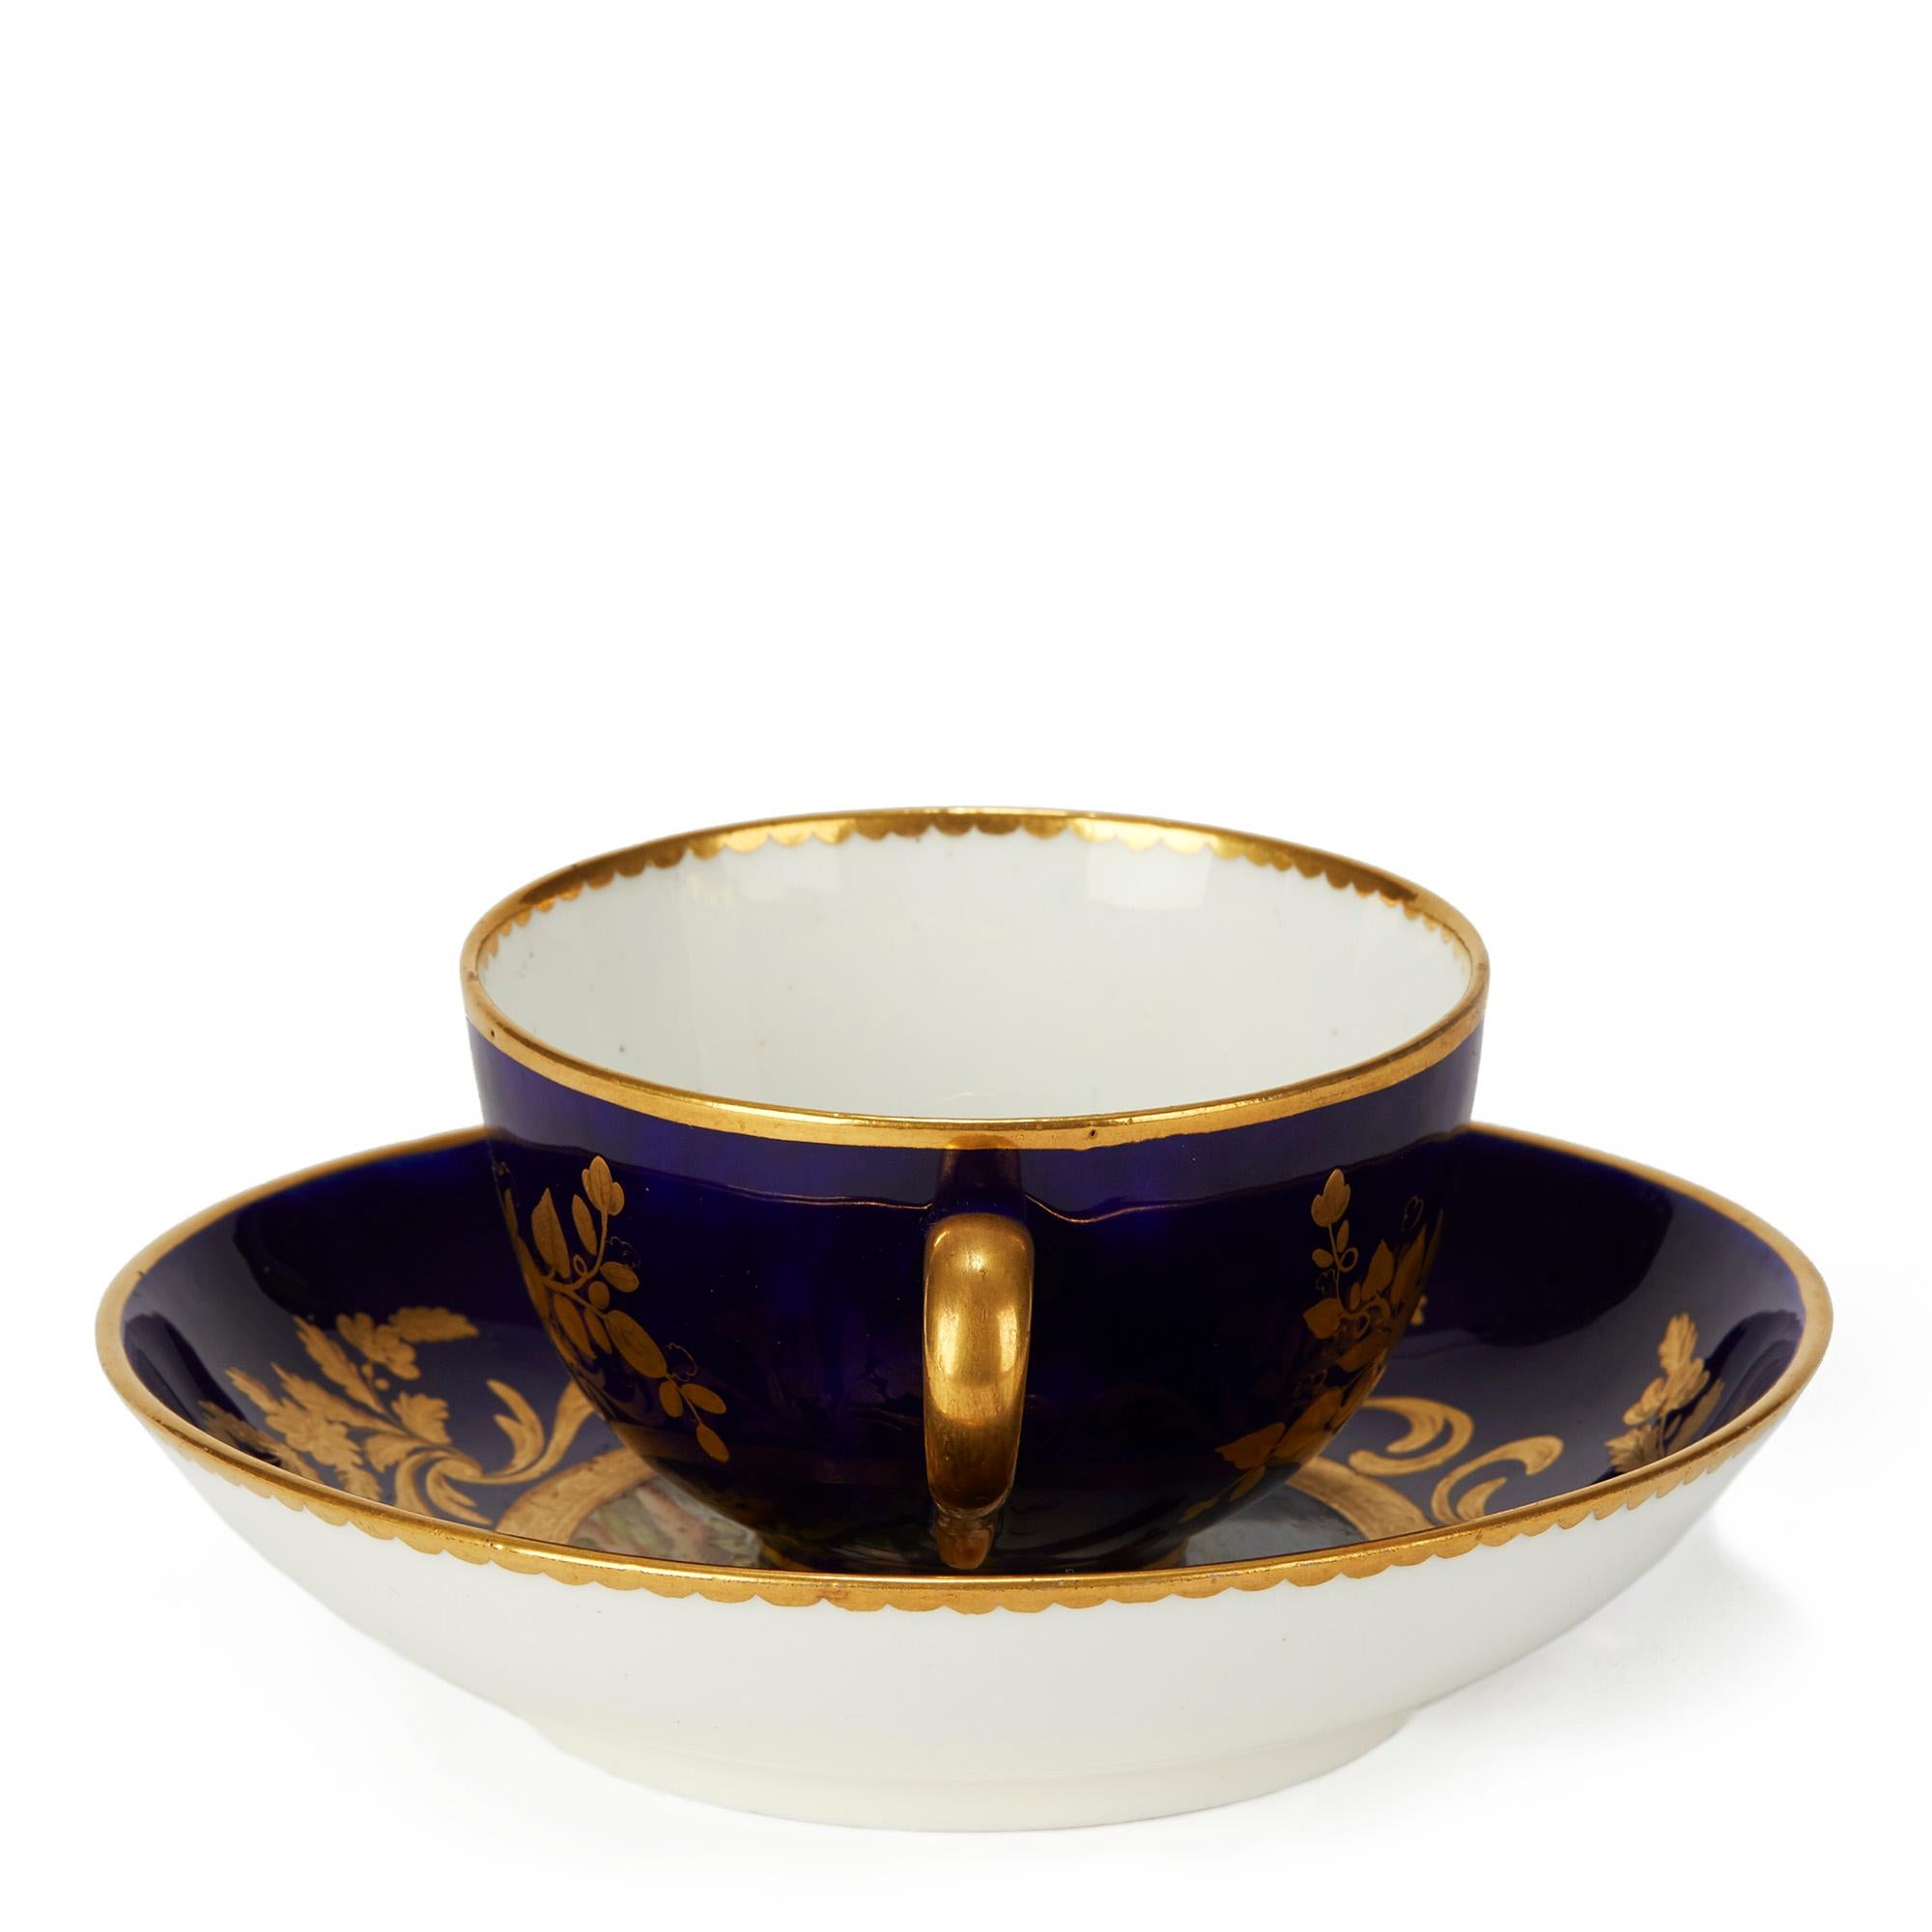 Sèvres French Porcelain Hand Painted Teacup and Saucer with Bird Scenes, 1791 For Sale 4